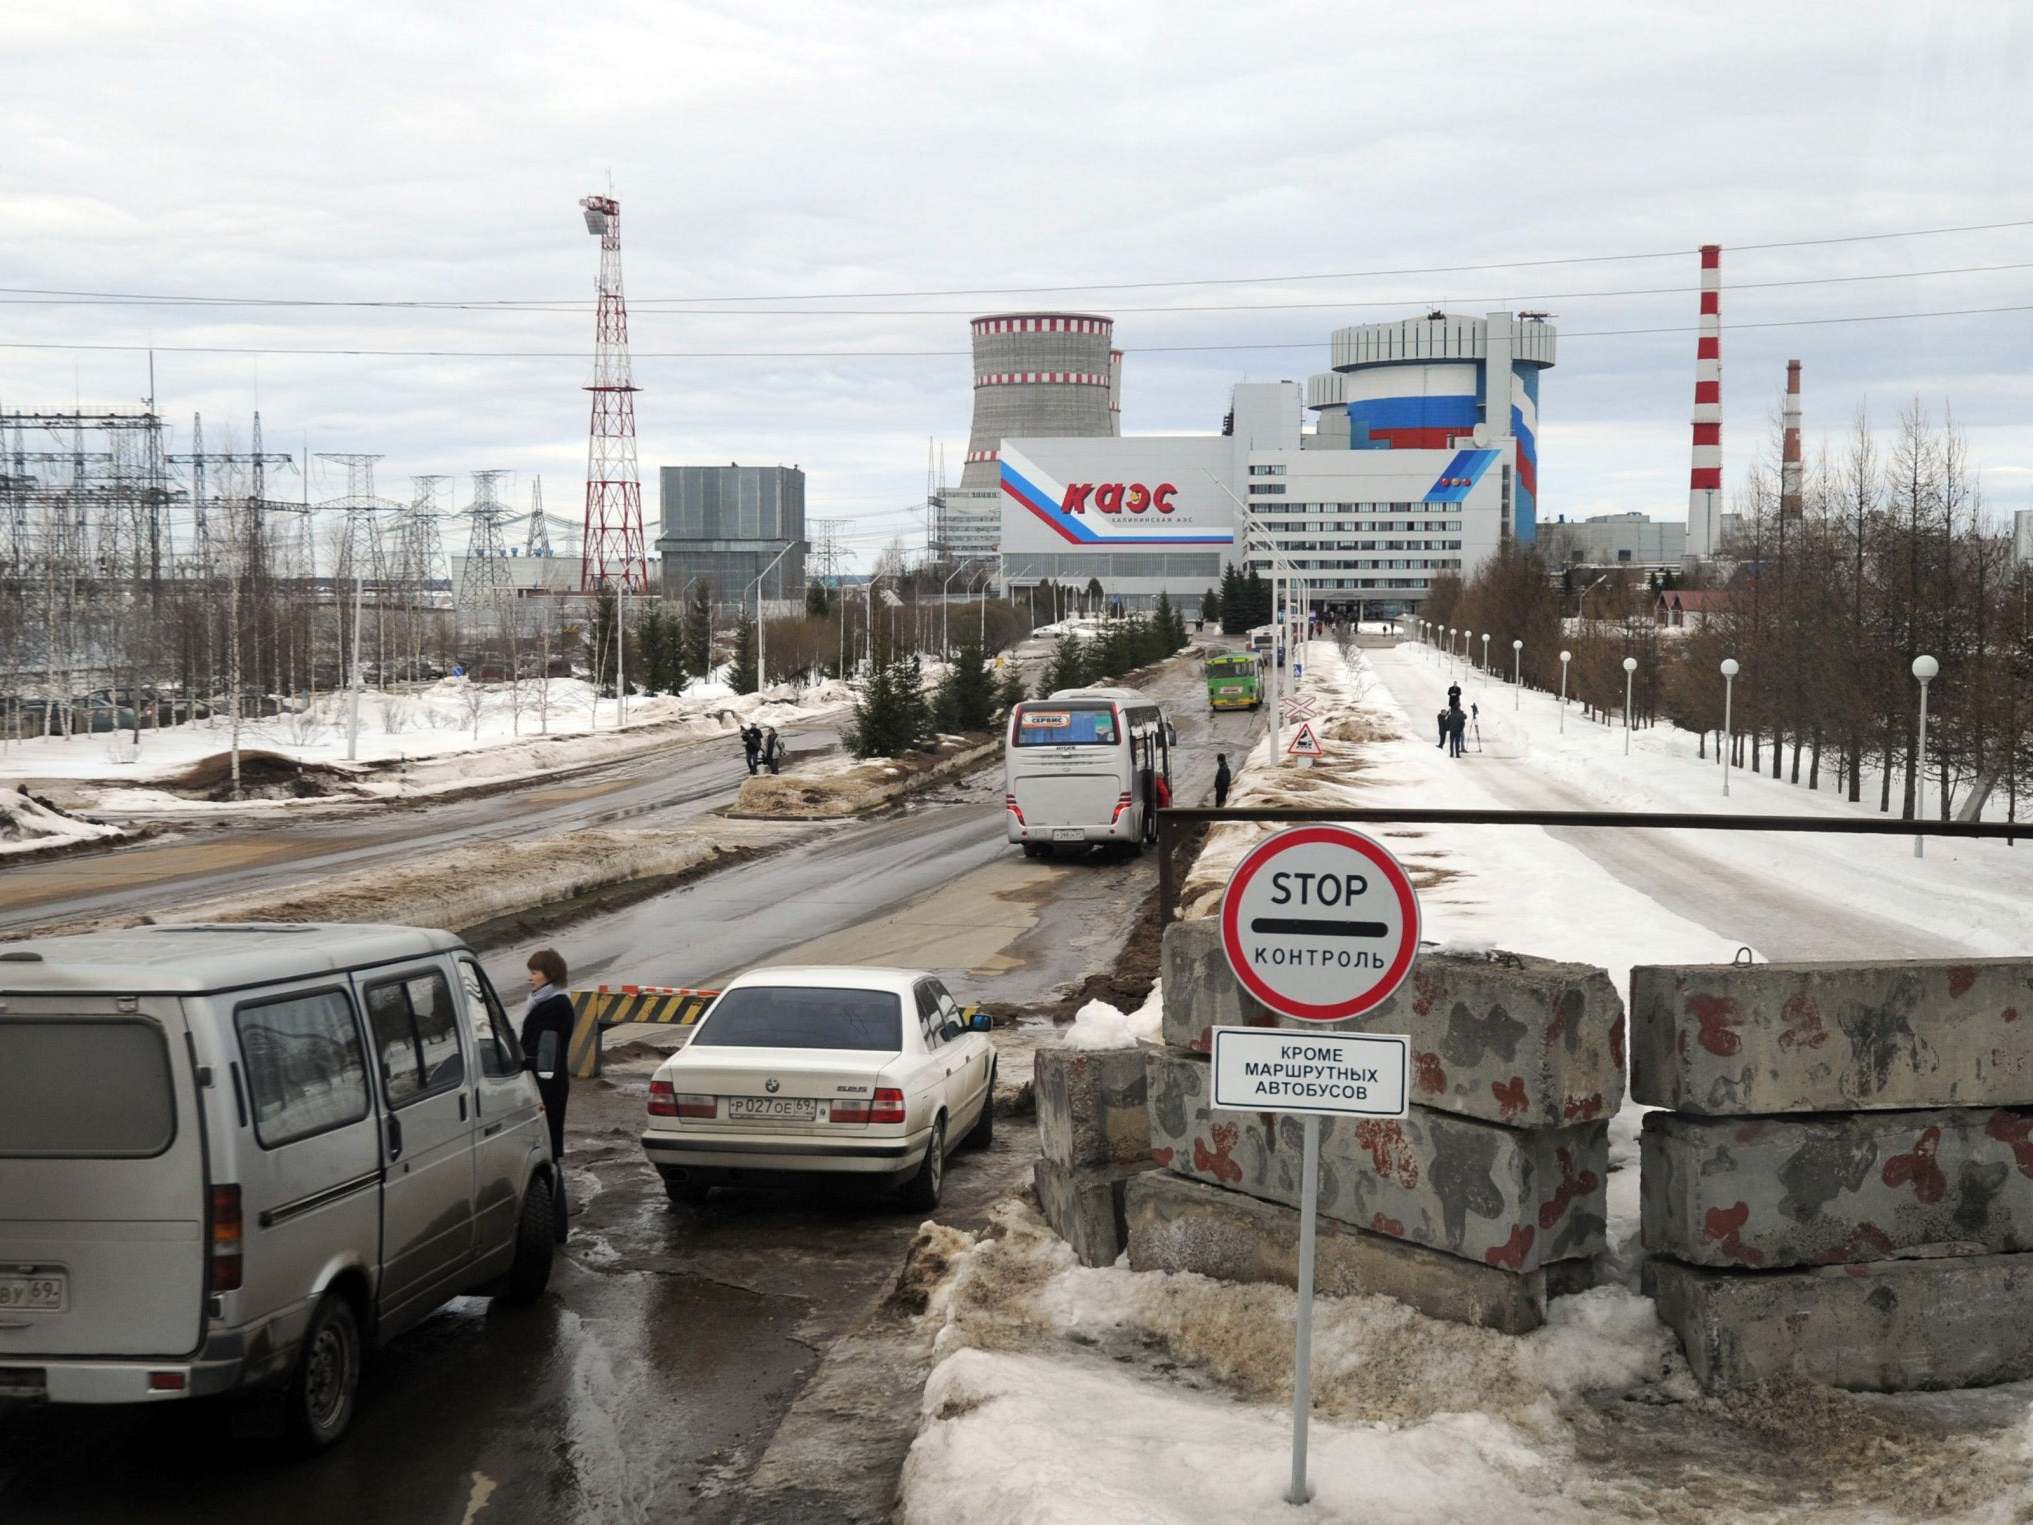 Checkpoint at the Kalinin nuclear power plant